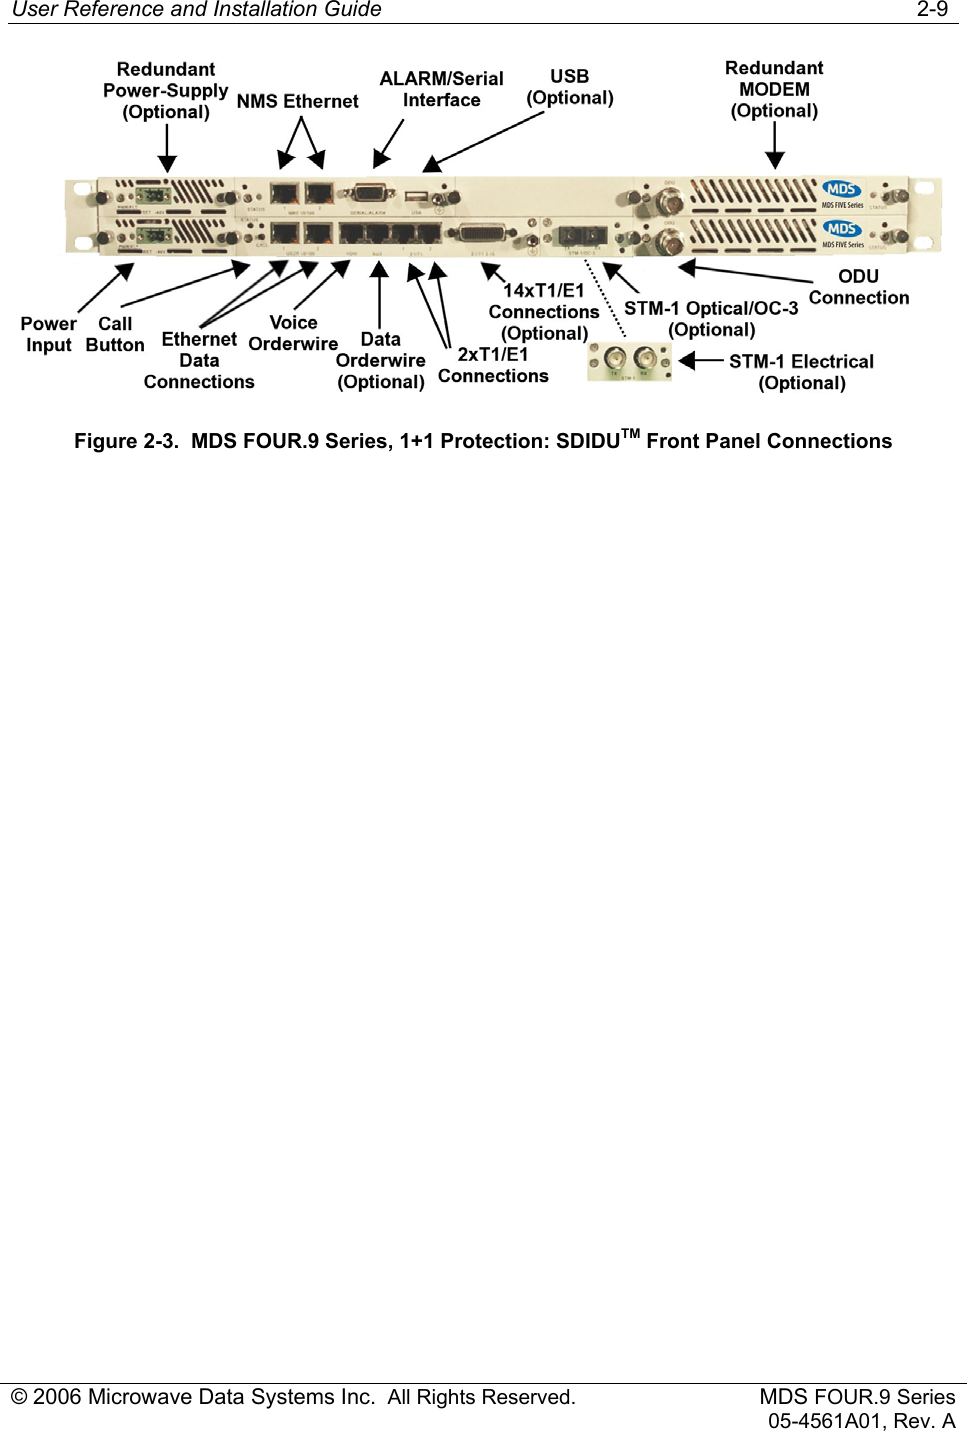 User Reference and Installation Guide   2-9 © 2006 Microwave Data Systems Inc.  All Rights Reserved. MDS FOUR.9 Series 05-4561A01, Rev. A  Figure 2-3.  MDS FOUR.9 Series, 1+1 Protection: SDIDUTM Front Panel Connections  